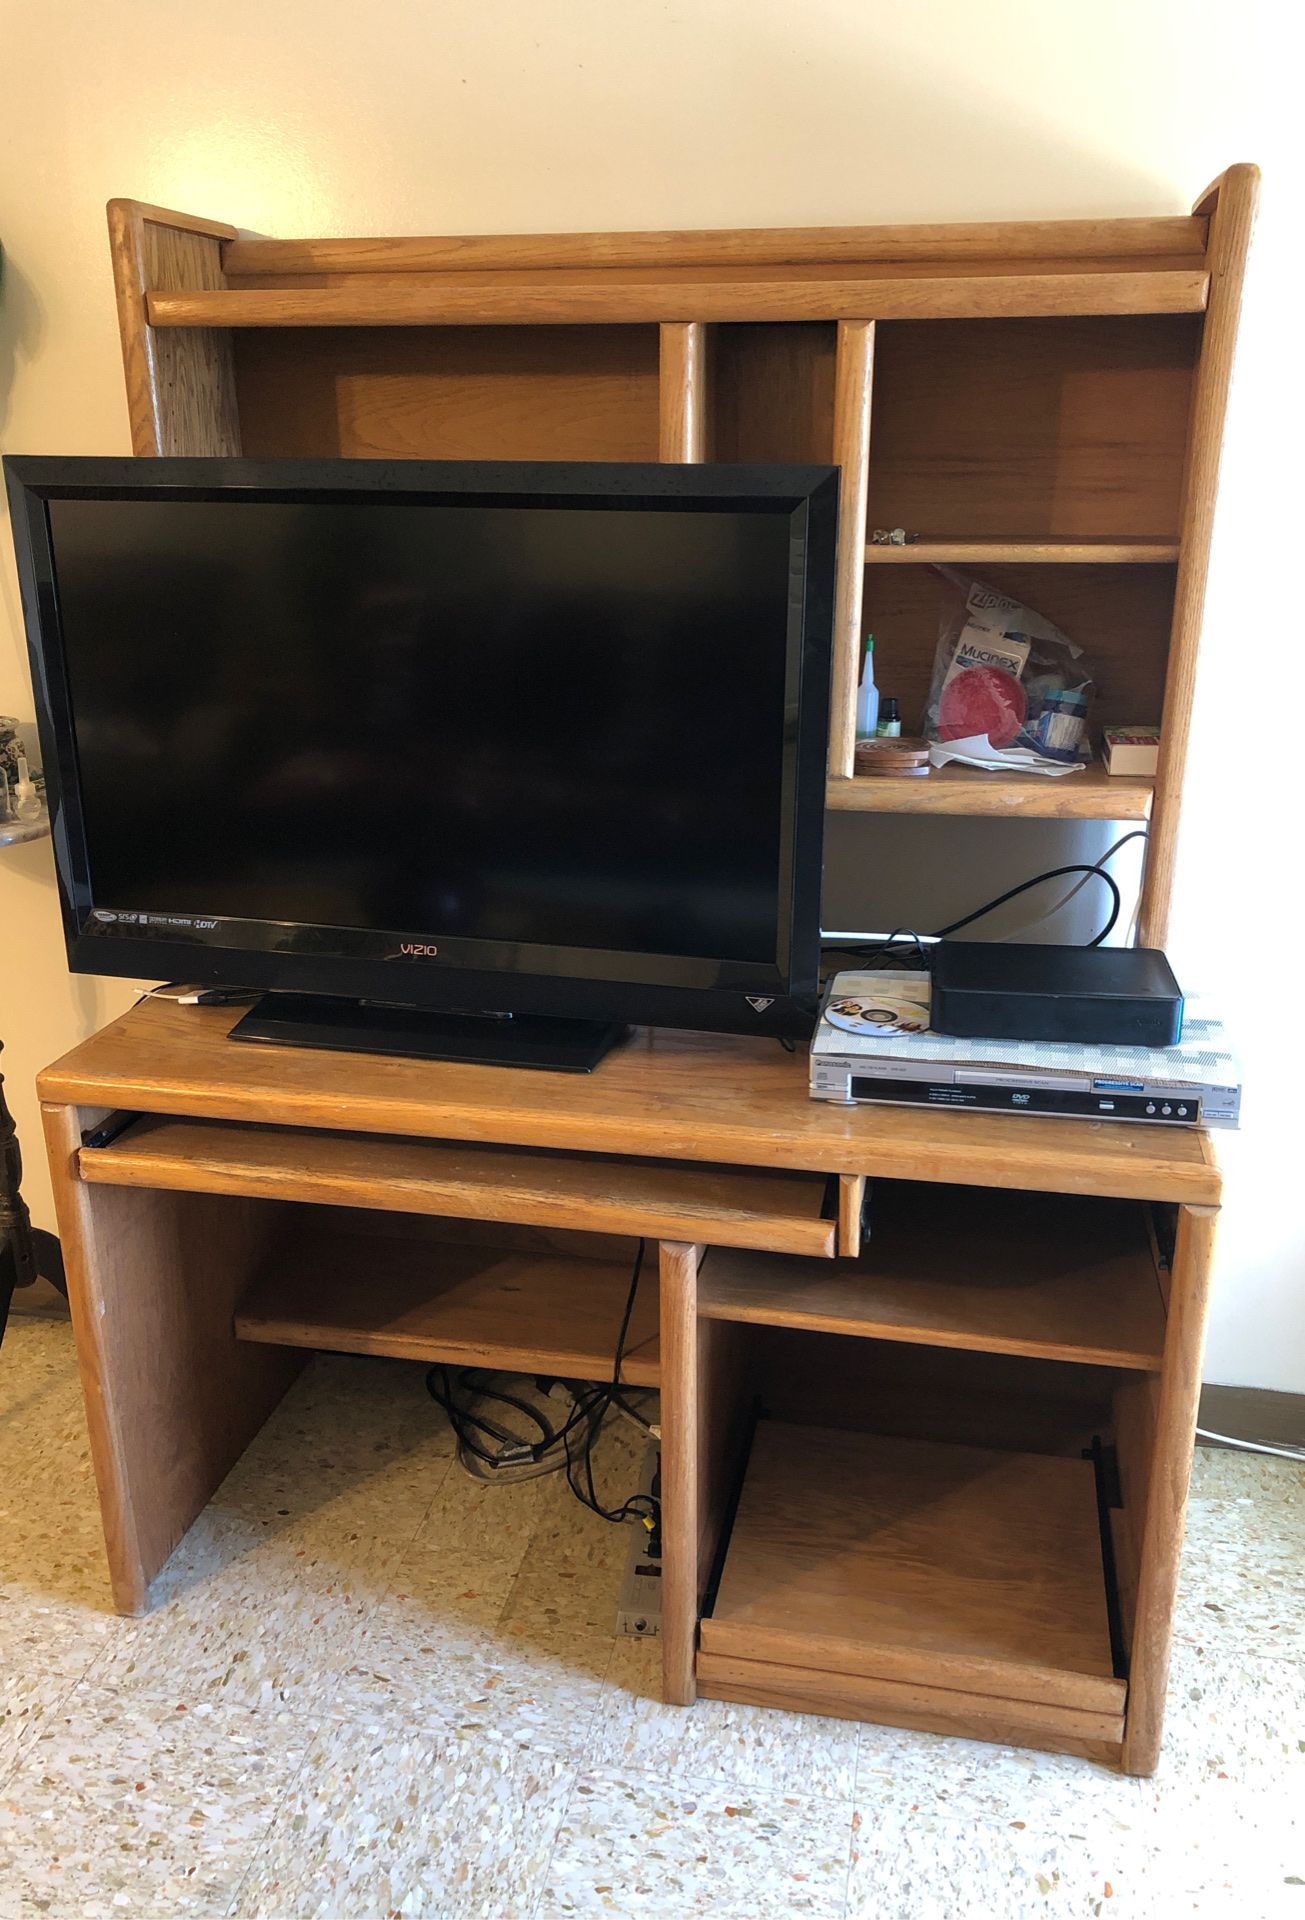 Solid wood desk used as entertainment center